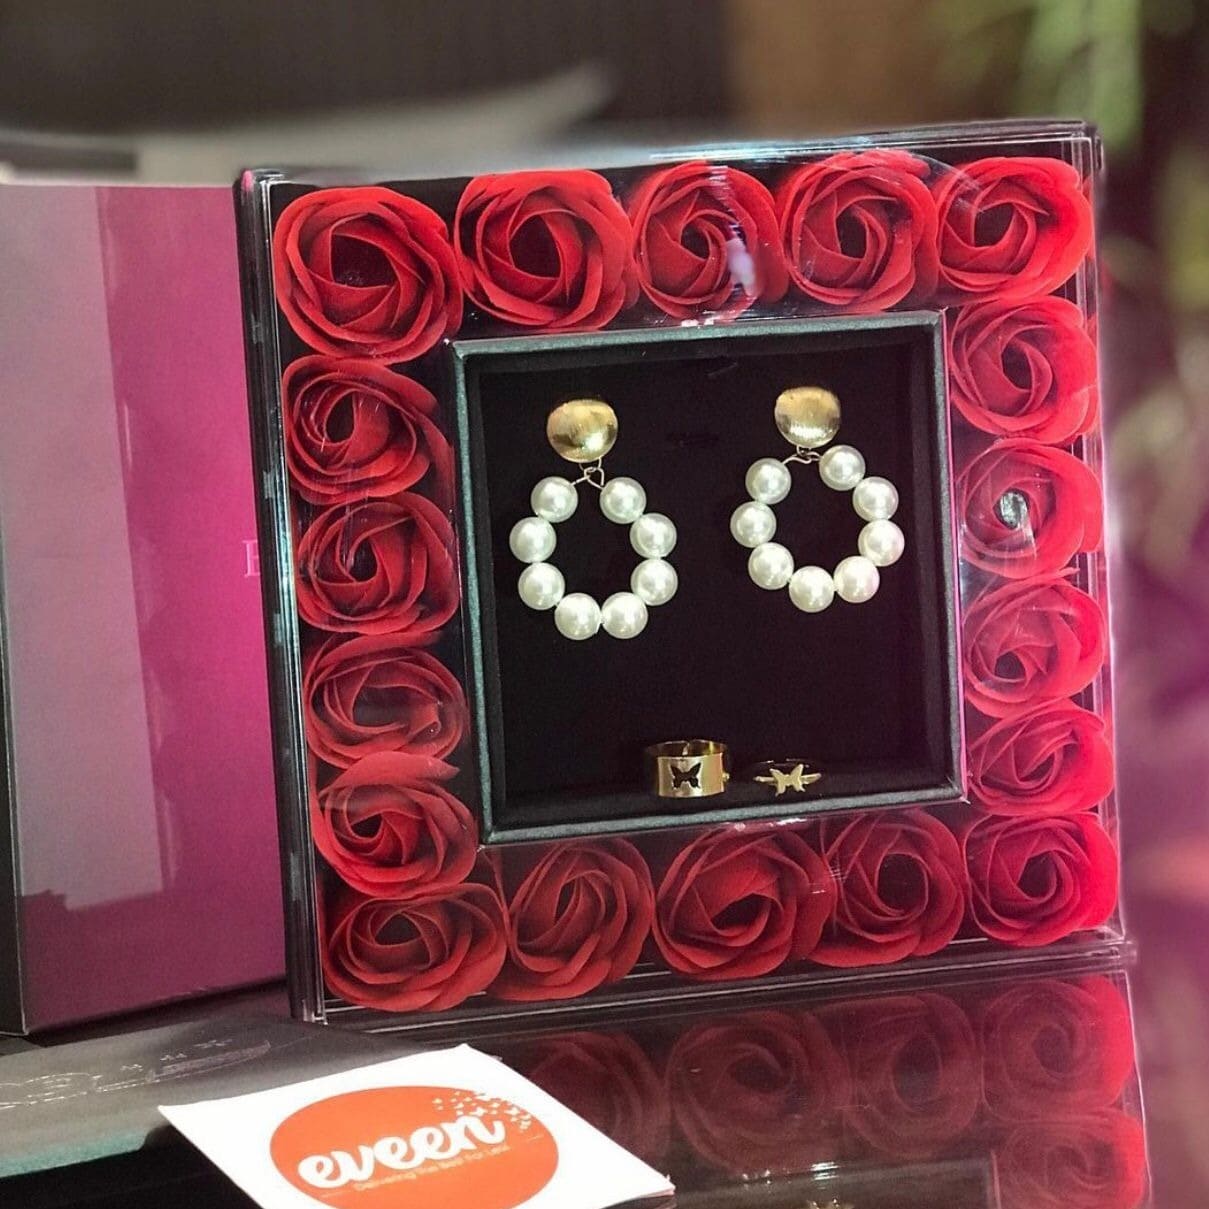 18 Flower Rose Box With Pearl Hoops And Butterfly Couple Rings, Red Roses Surprise Gift Box With Drop Earrings, 18 Red Roses Jewelry Storage Box, Surprise Gift Jewellery Storage Box